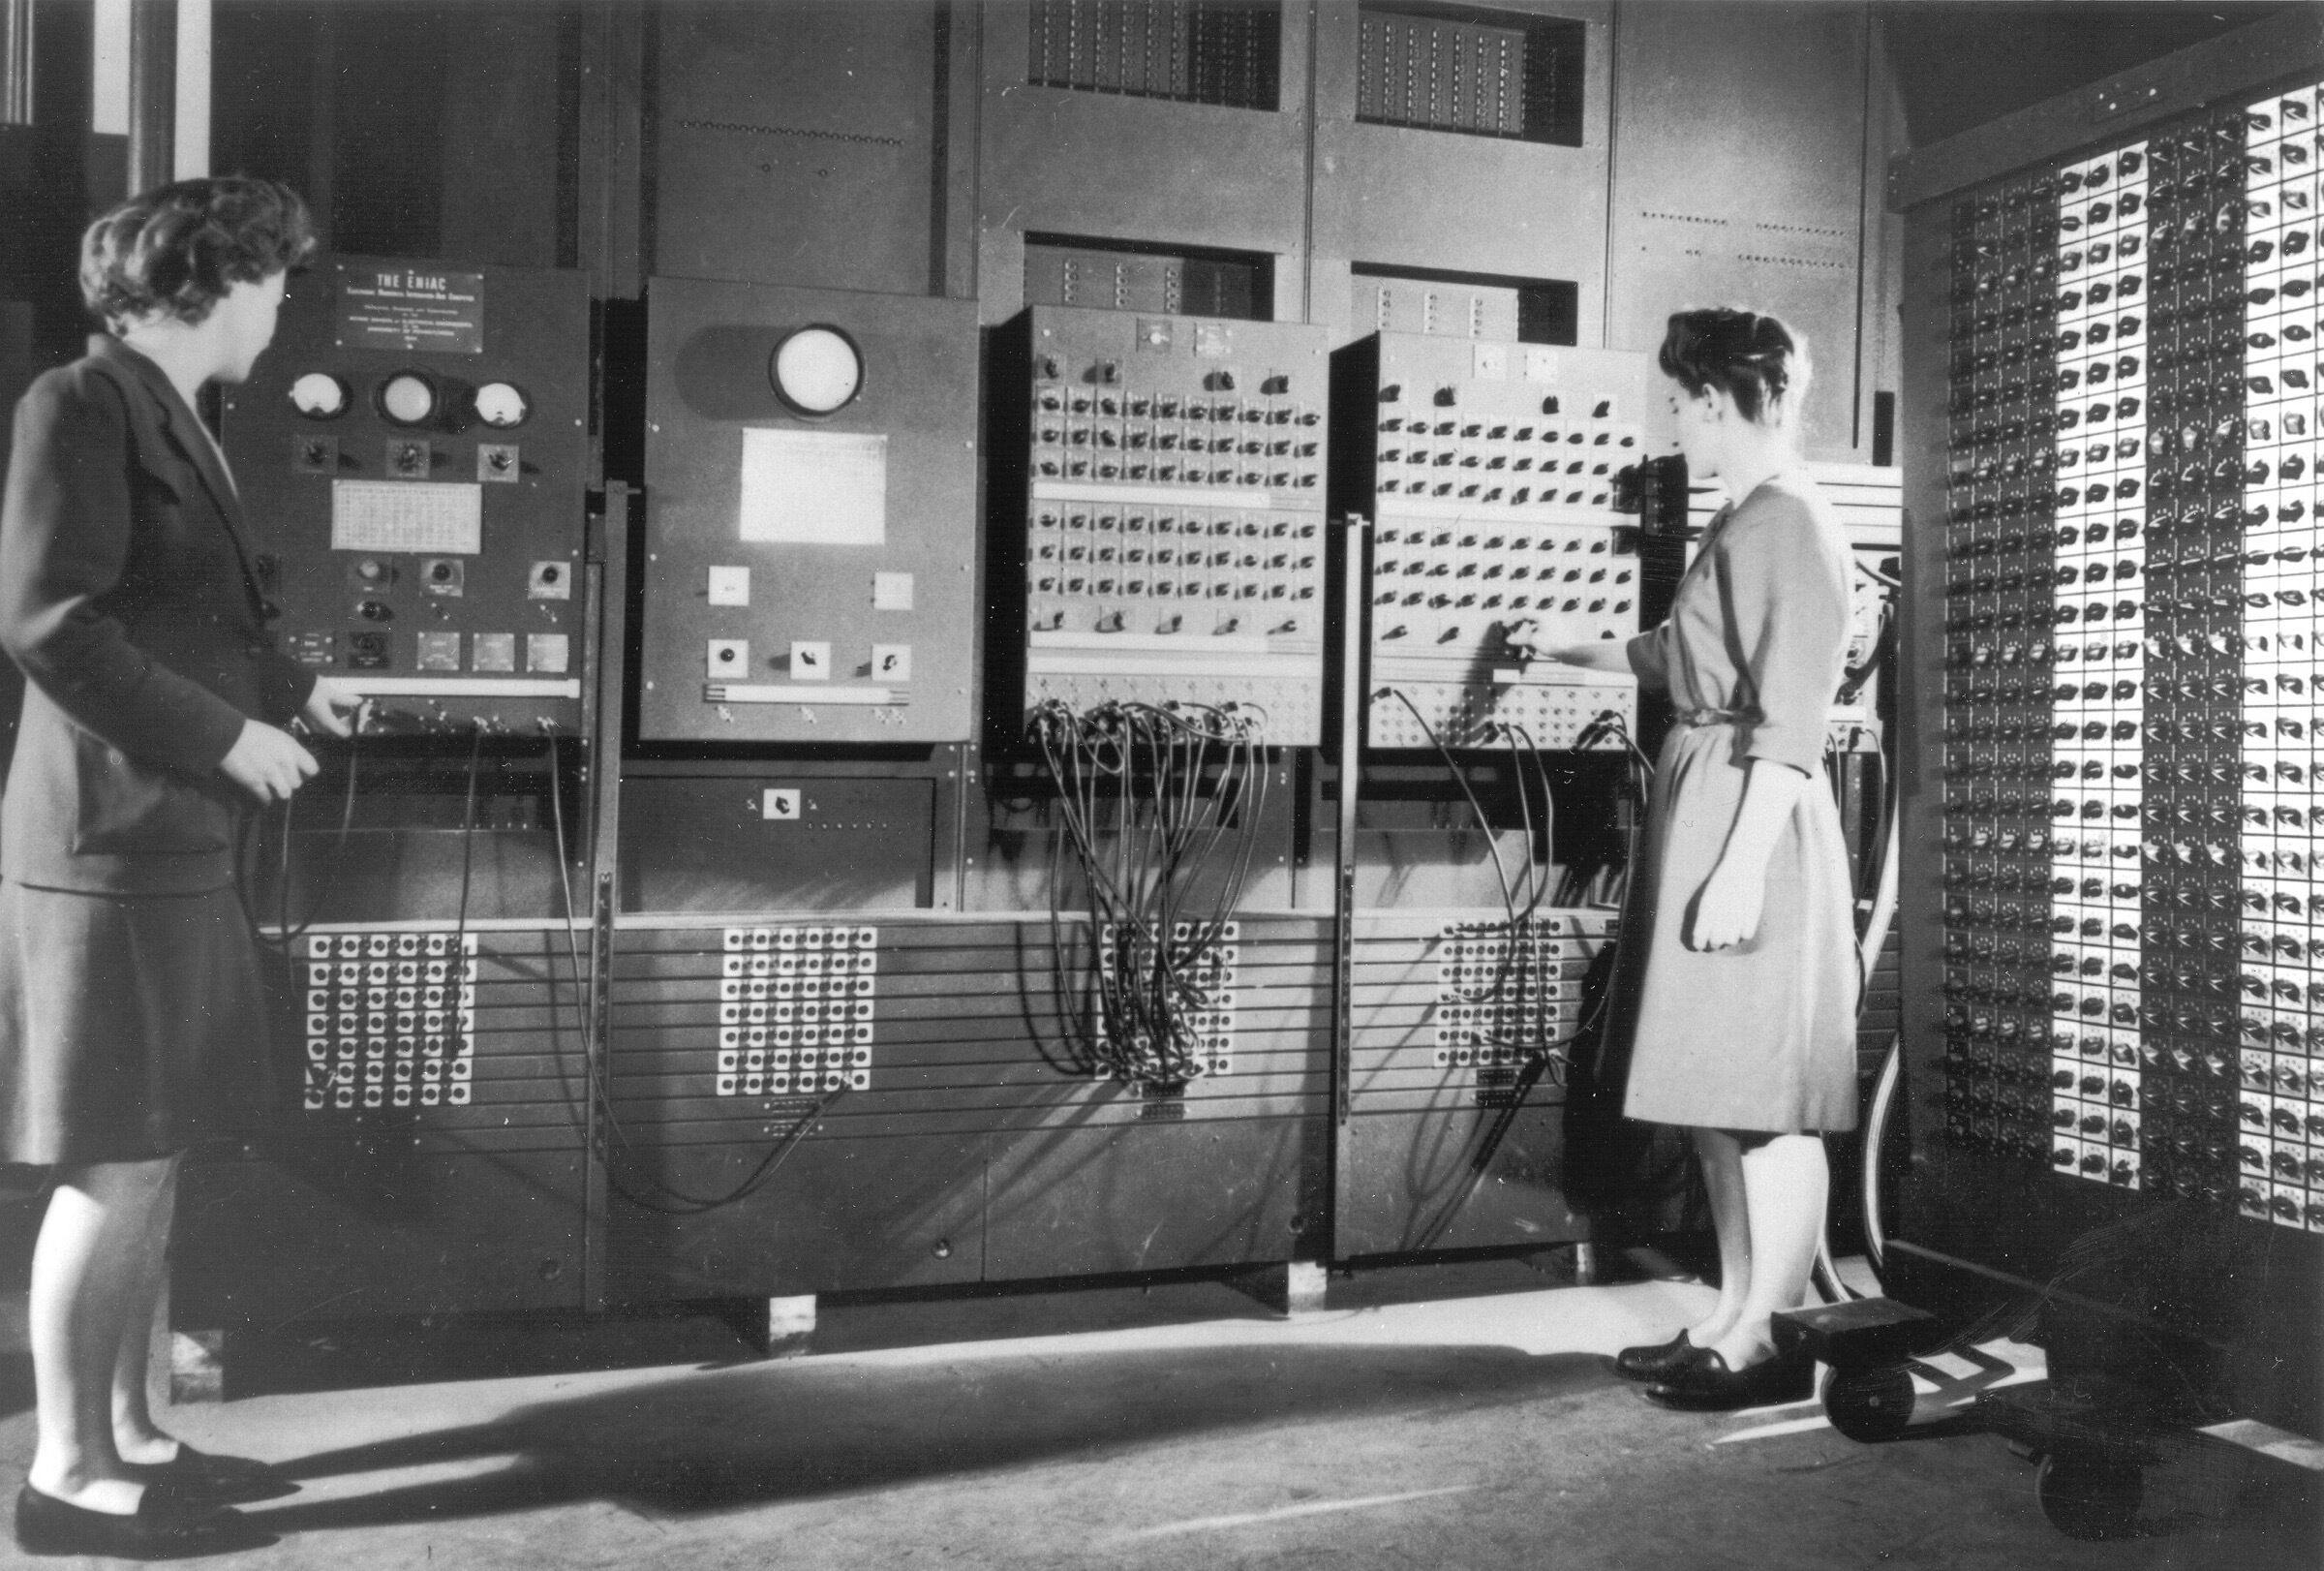 Betty Jennings (Mrs. Bartik) and Frances Bilas (Mrs. Spence) operating the ENIAC’s main control panel while the machine was still located at the Moore School. Source: ARL Technical Library/Historic Computer Images/Public Domain